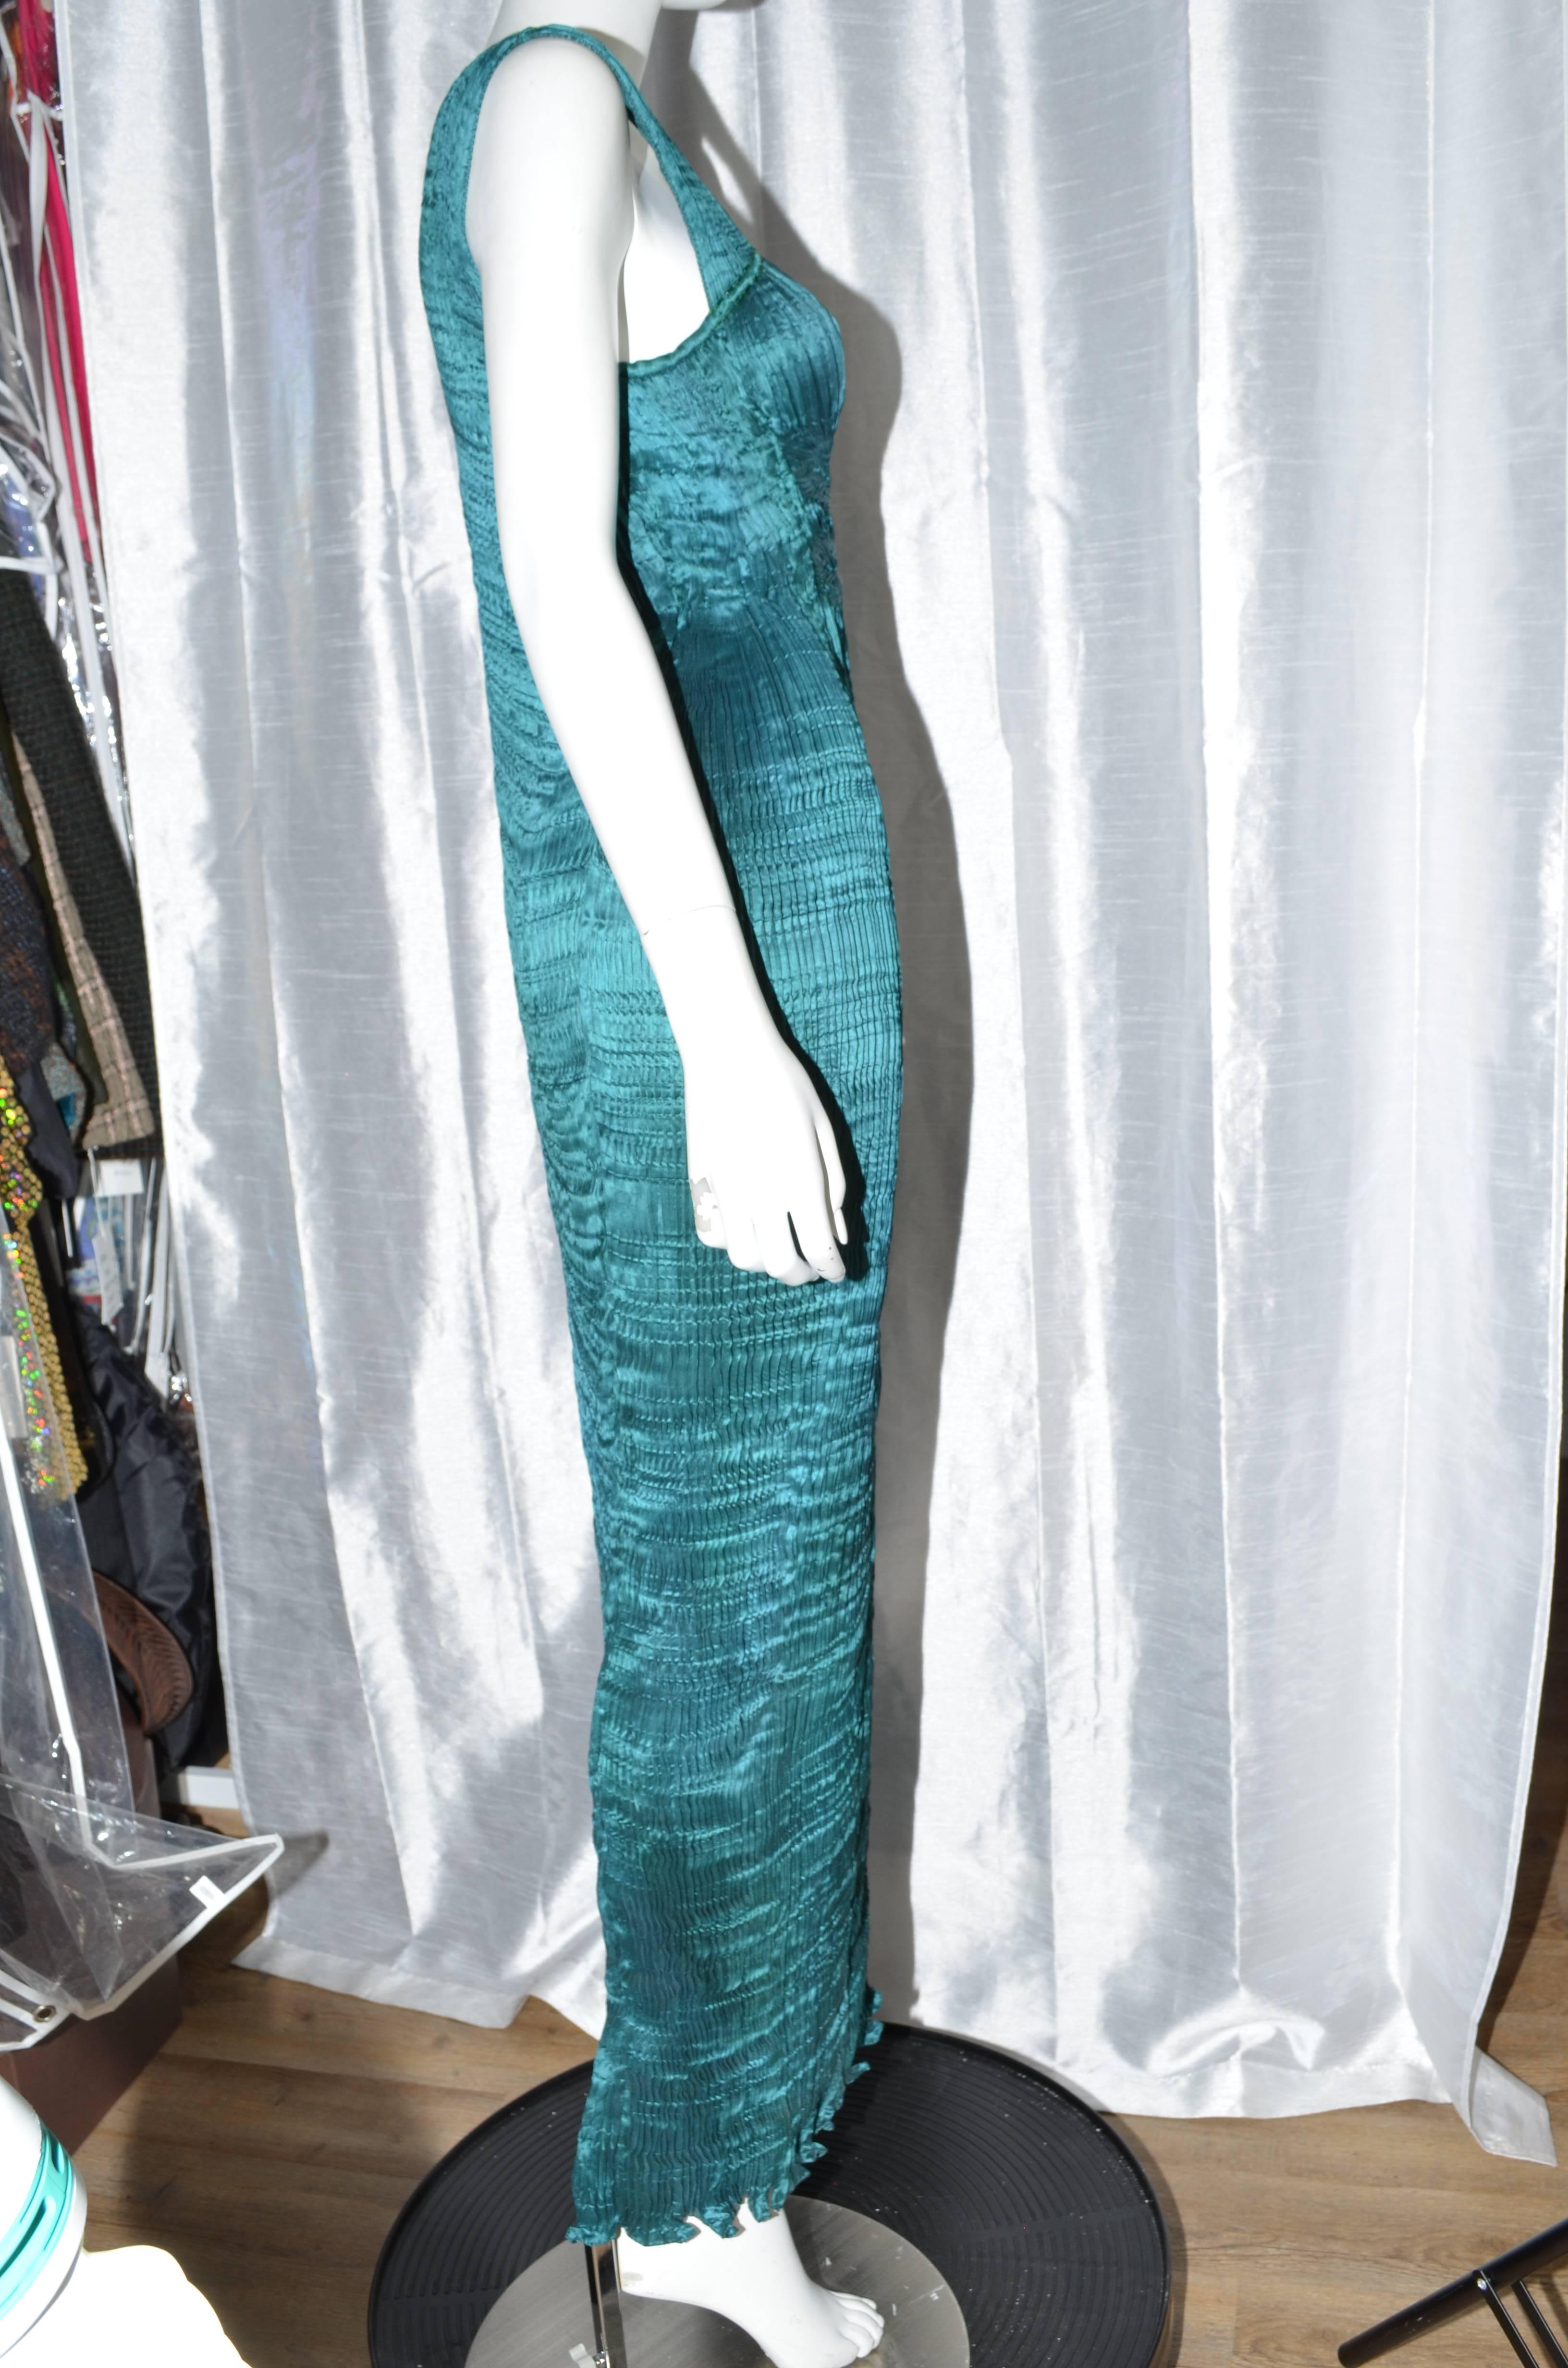 Beautiful Charles and Patricia Lester pleated silk gown in the style of Fortuny. Art to wear. This lovely emerald-blue gown is in excellent condition. Please see images for details. Best fits a medium or large, please see measurements. Estimated